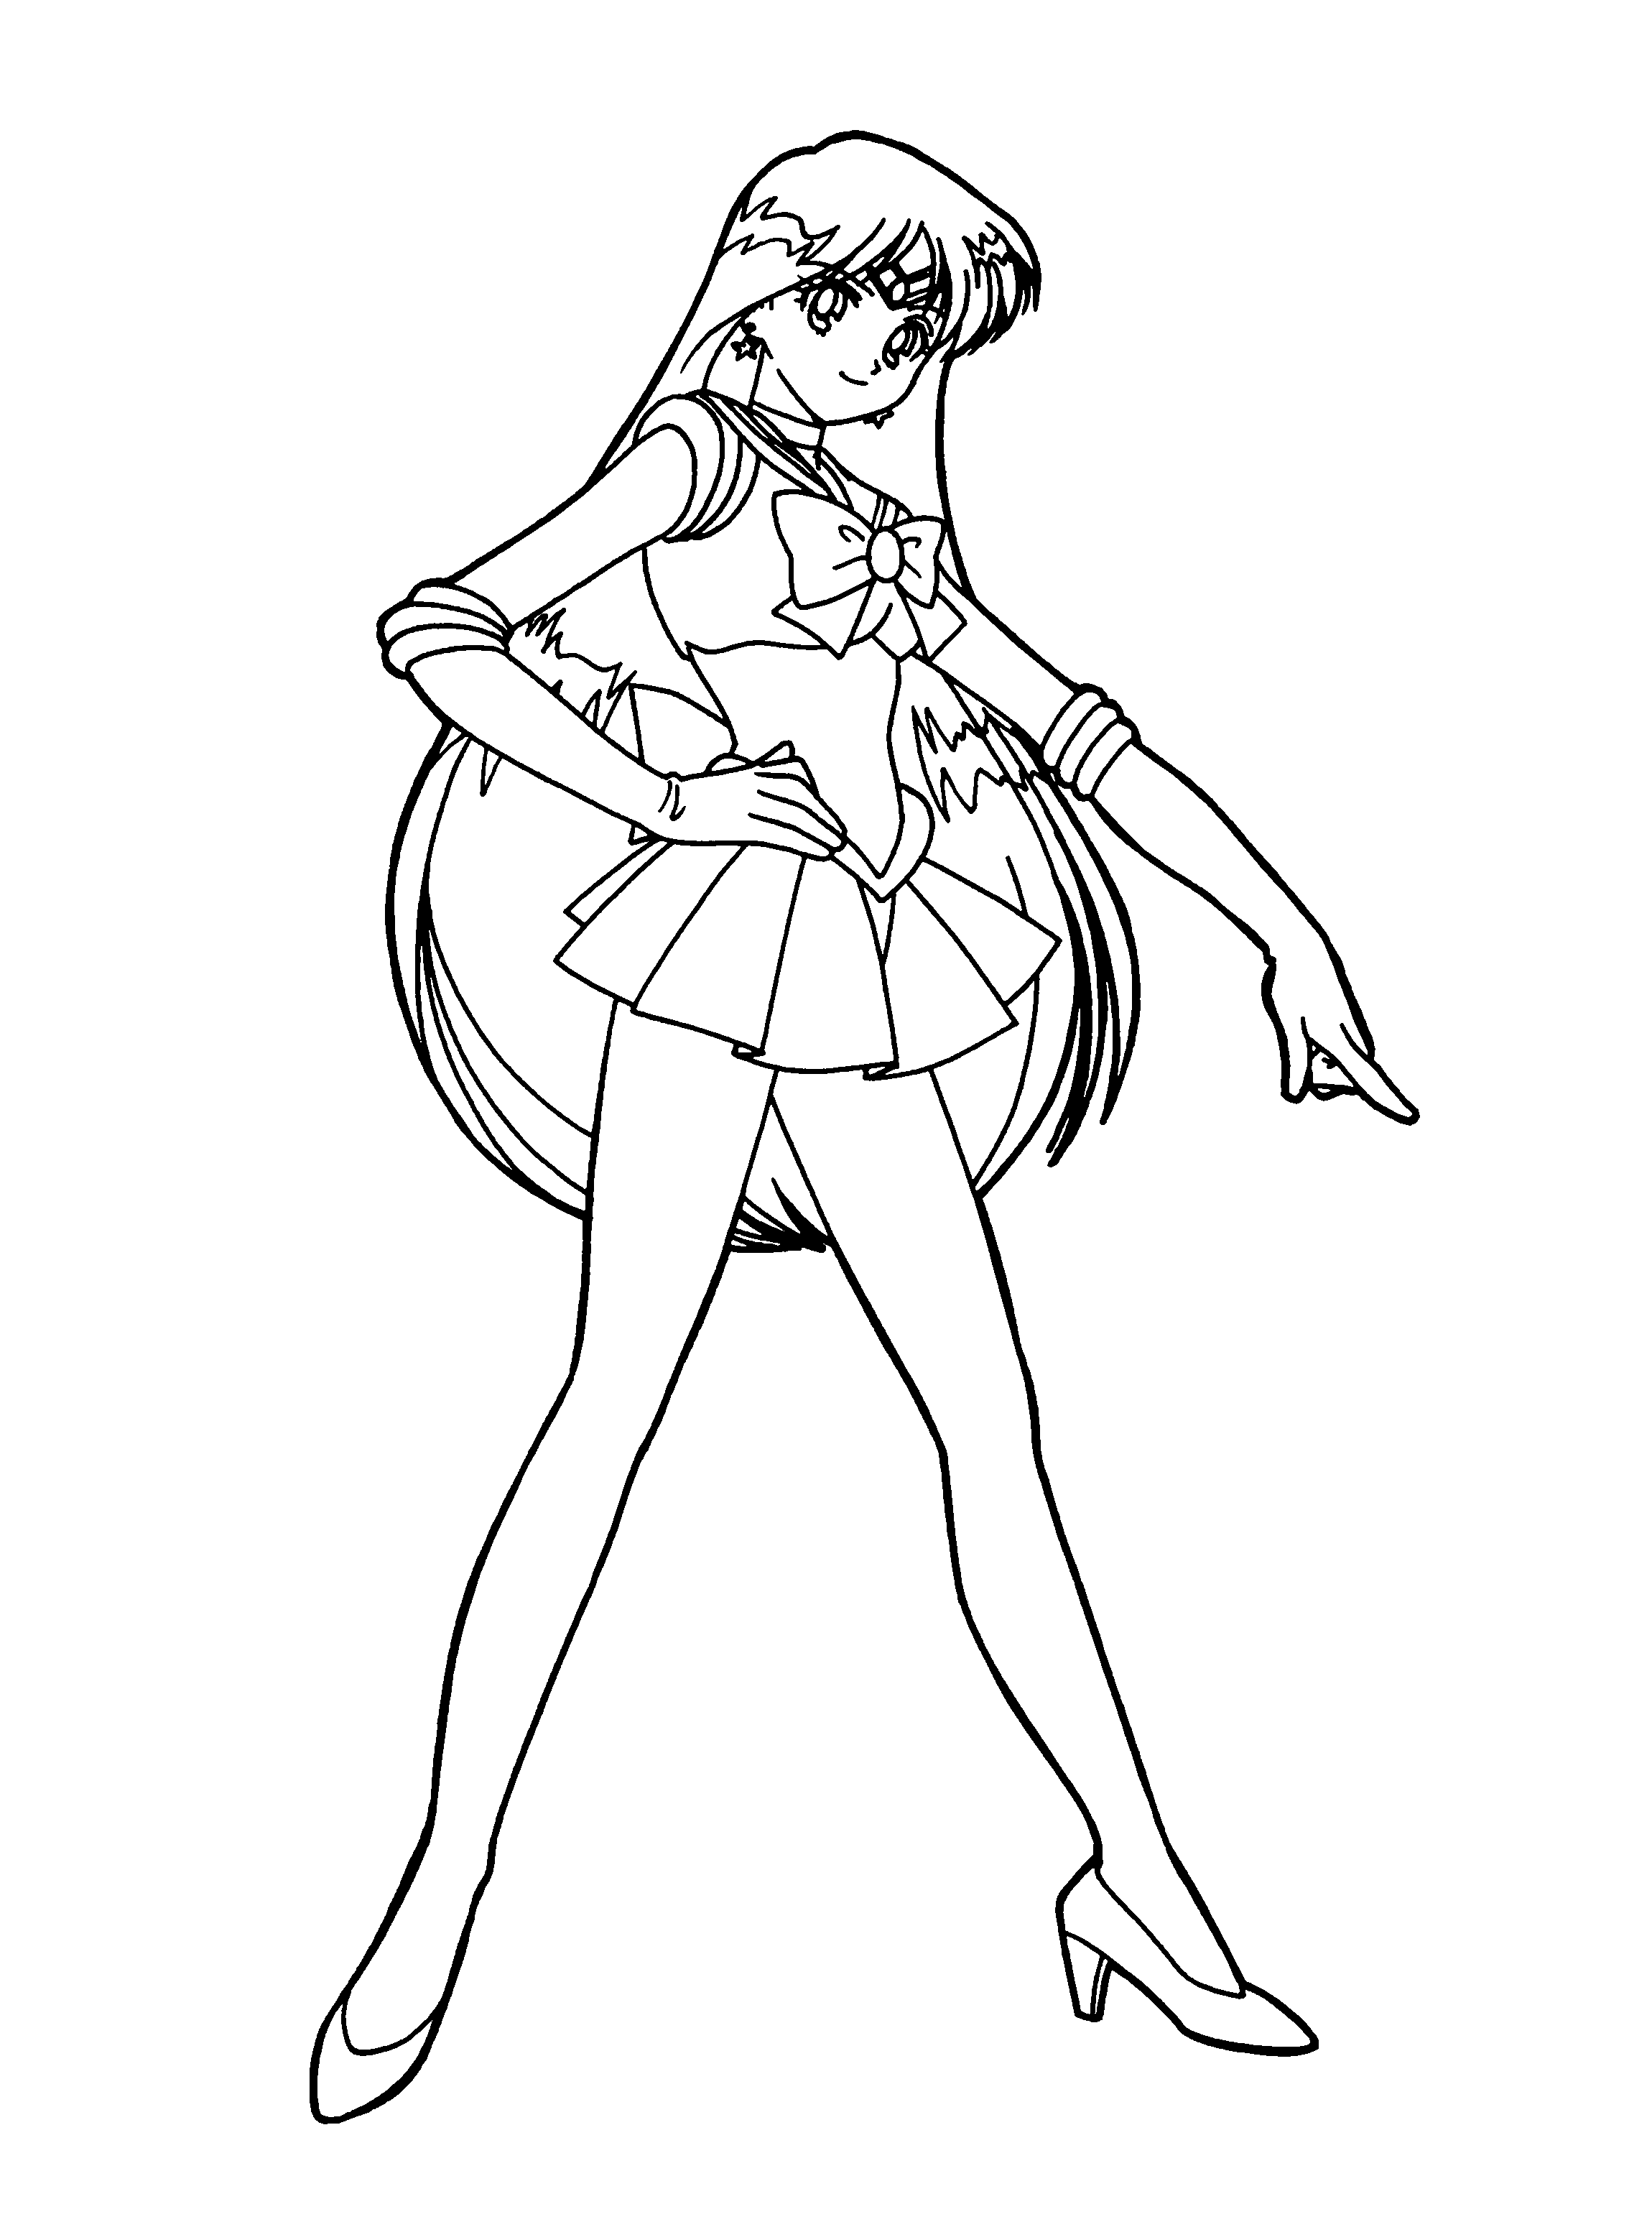 sailor moon coloring pages sailor moon coloring pages pose kiddypicts pages coloring sailor moon 